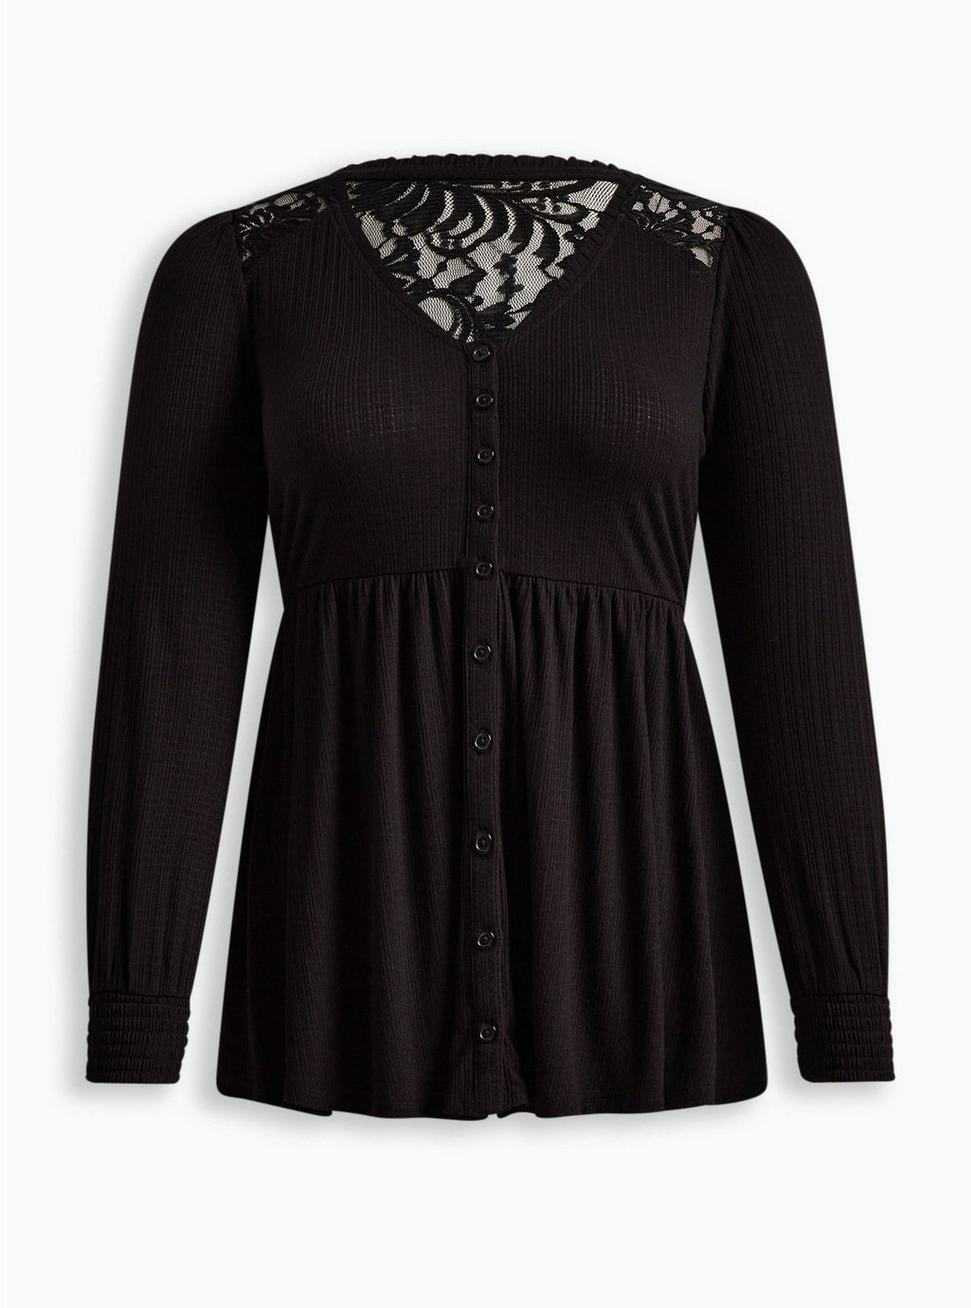 Babydoll Knit V-Neck Button-Front Lace Inset Peasant Sleeve Top, BLACK, hi-res